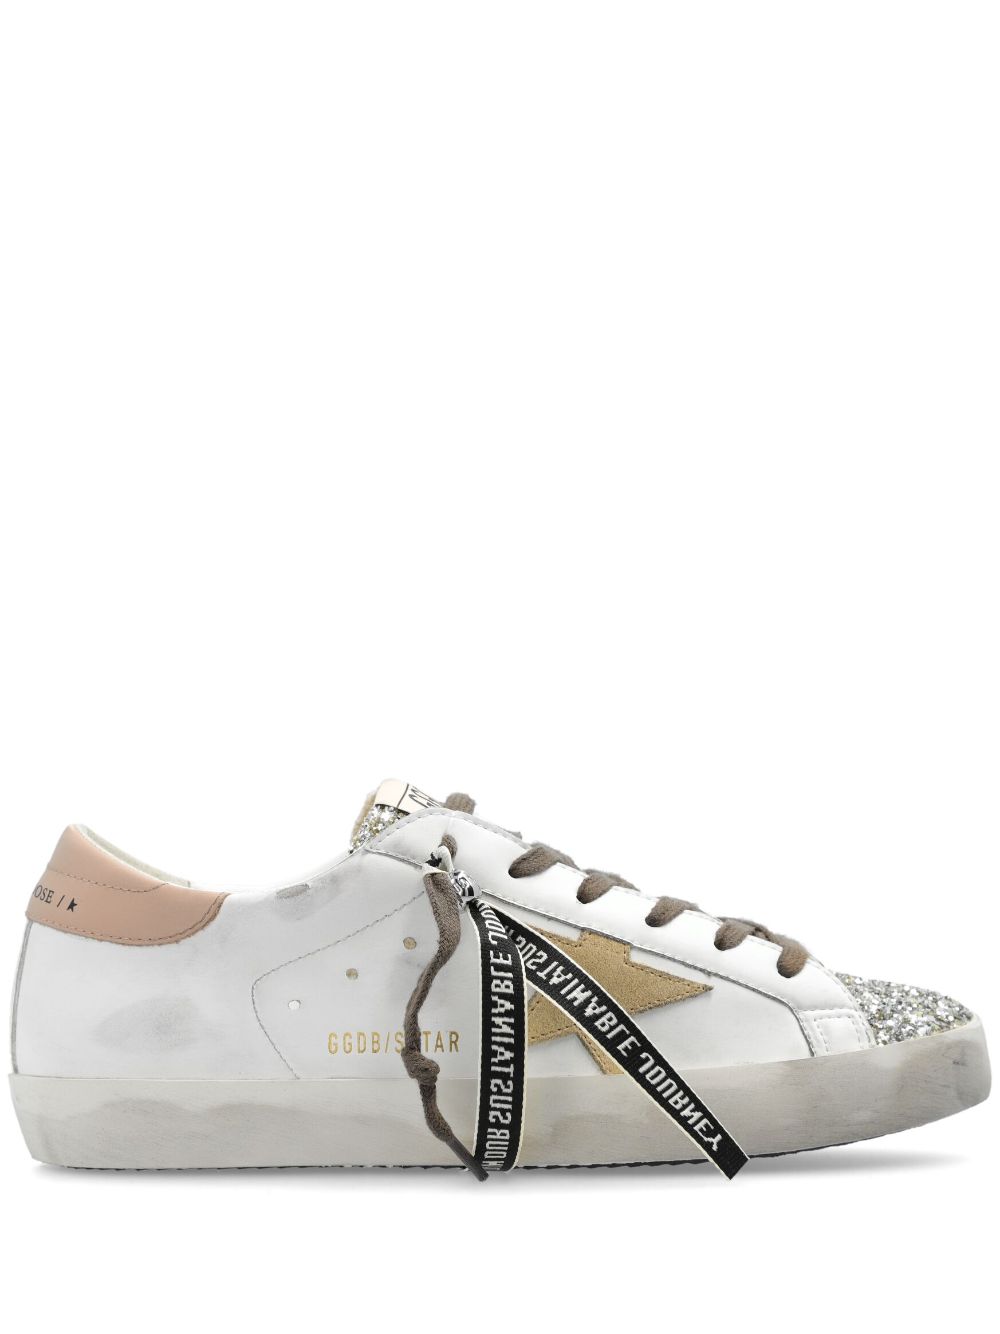 Image 1 of Golden Goose Super-Star Classic leather sneakers